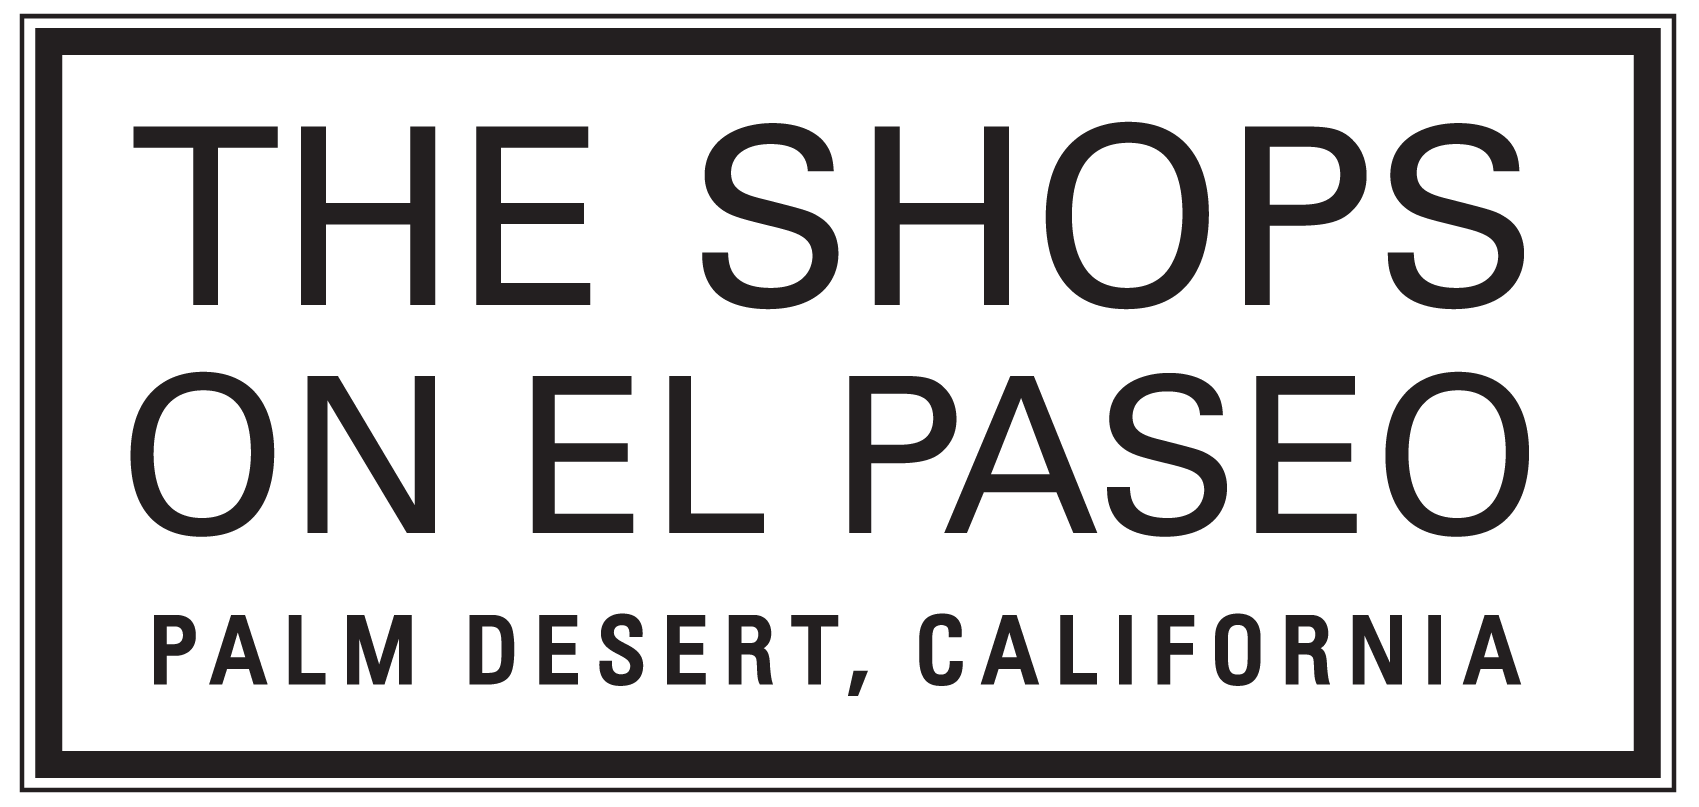 Discover Palm Desert - The Gardens on El Paseo is now OPEN! Anthropologie,  Louis Vuitton and more retailers are now open for shopping. Give your  favorite shop a call to see if